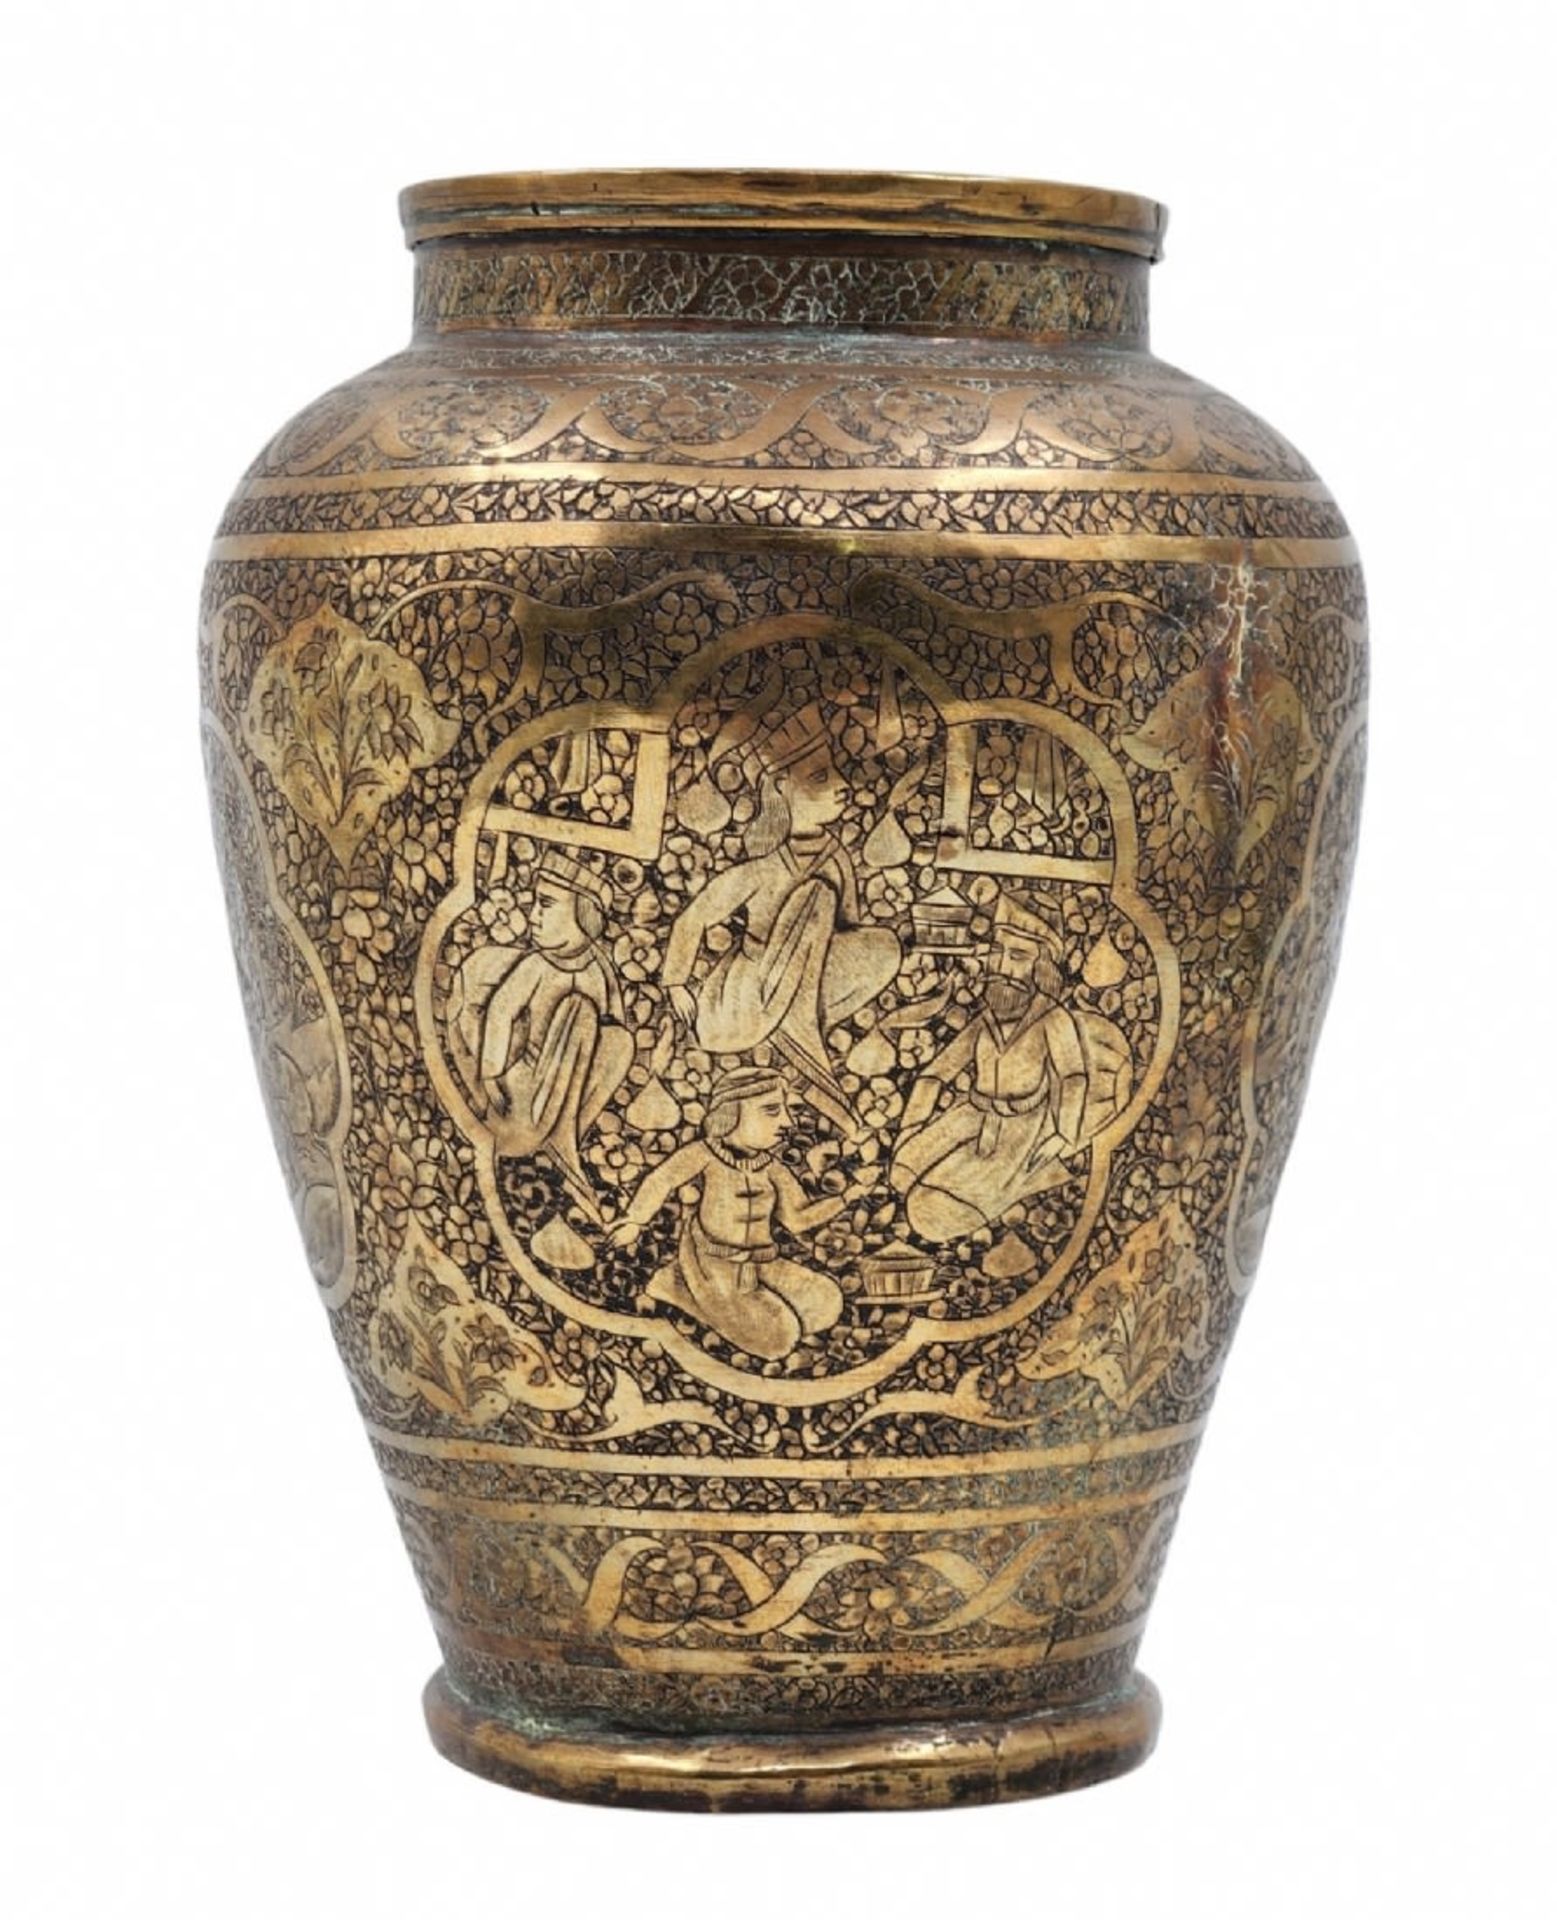 An antique Persian Hindu Urn, beautiful and especially high-quality 19th century urn, made of brass, - Image 3 of 6